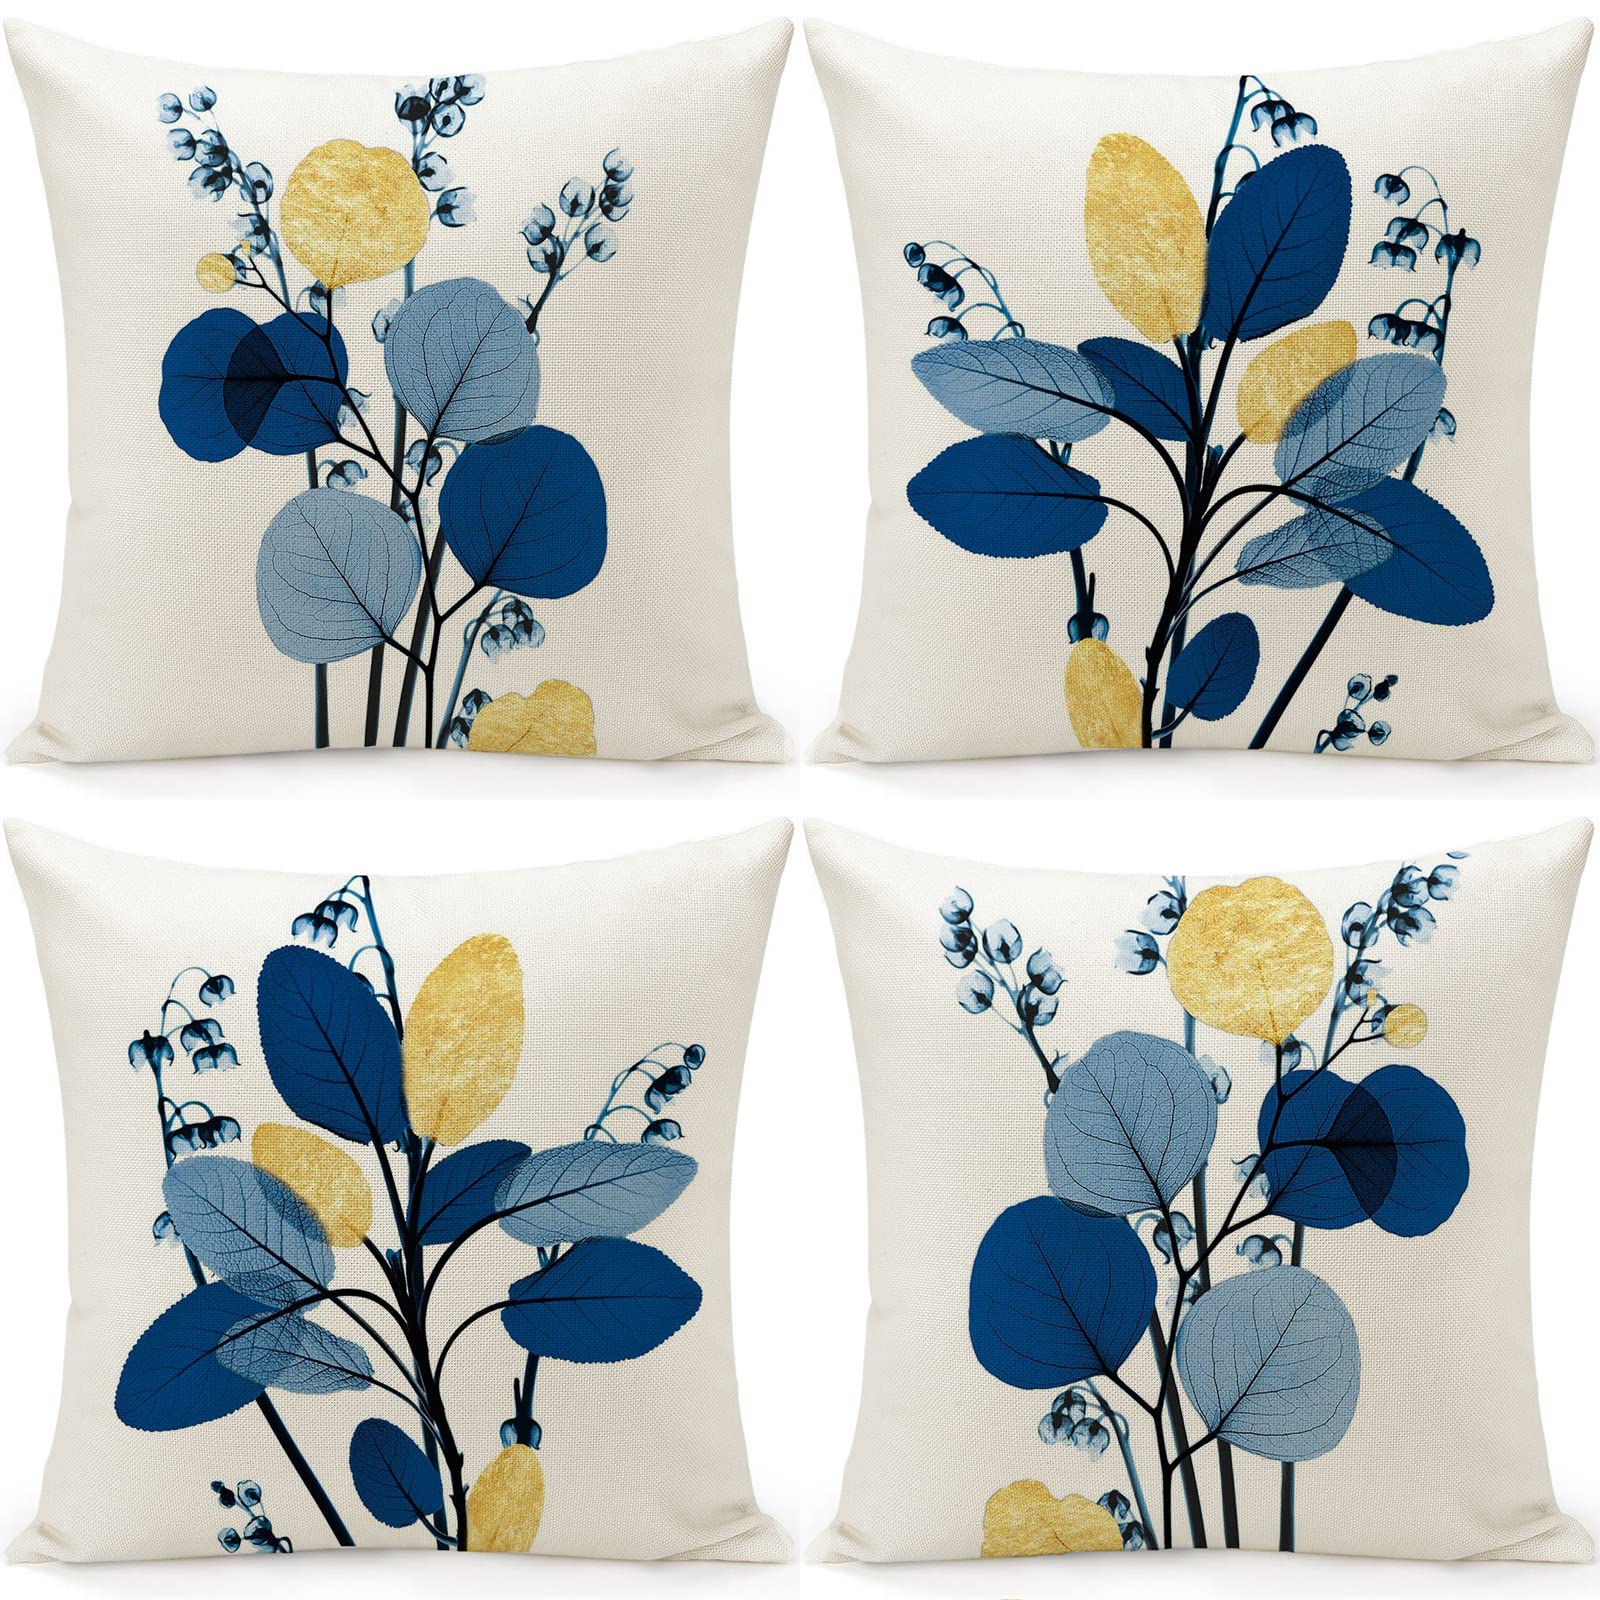 Cushion Covers Outdoor Waterproof Navy Blue Leaf Cushions Throw Pillow Cover Set of 4 Home Sofa Art Decorative for Living Room Garden Linen 18 x18 inch 45x45cm